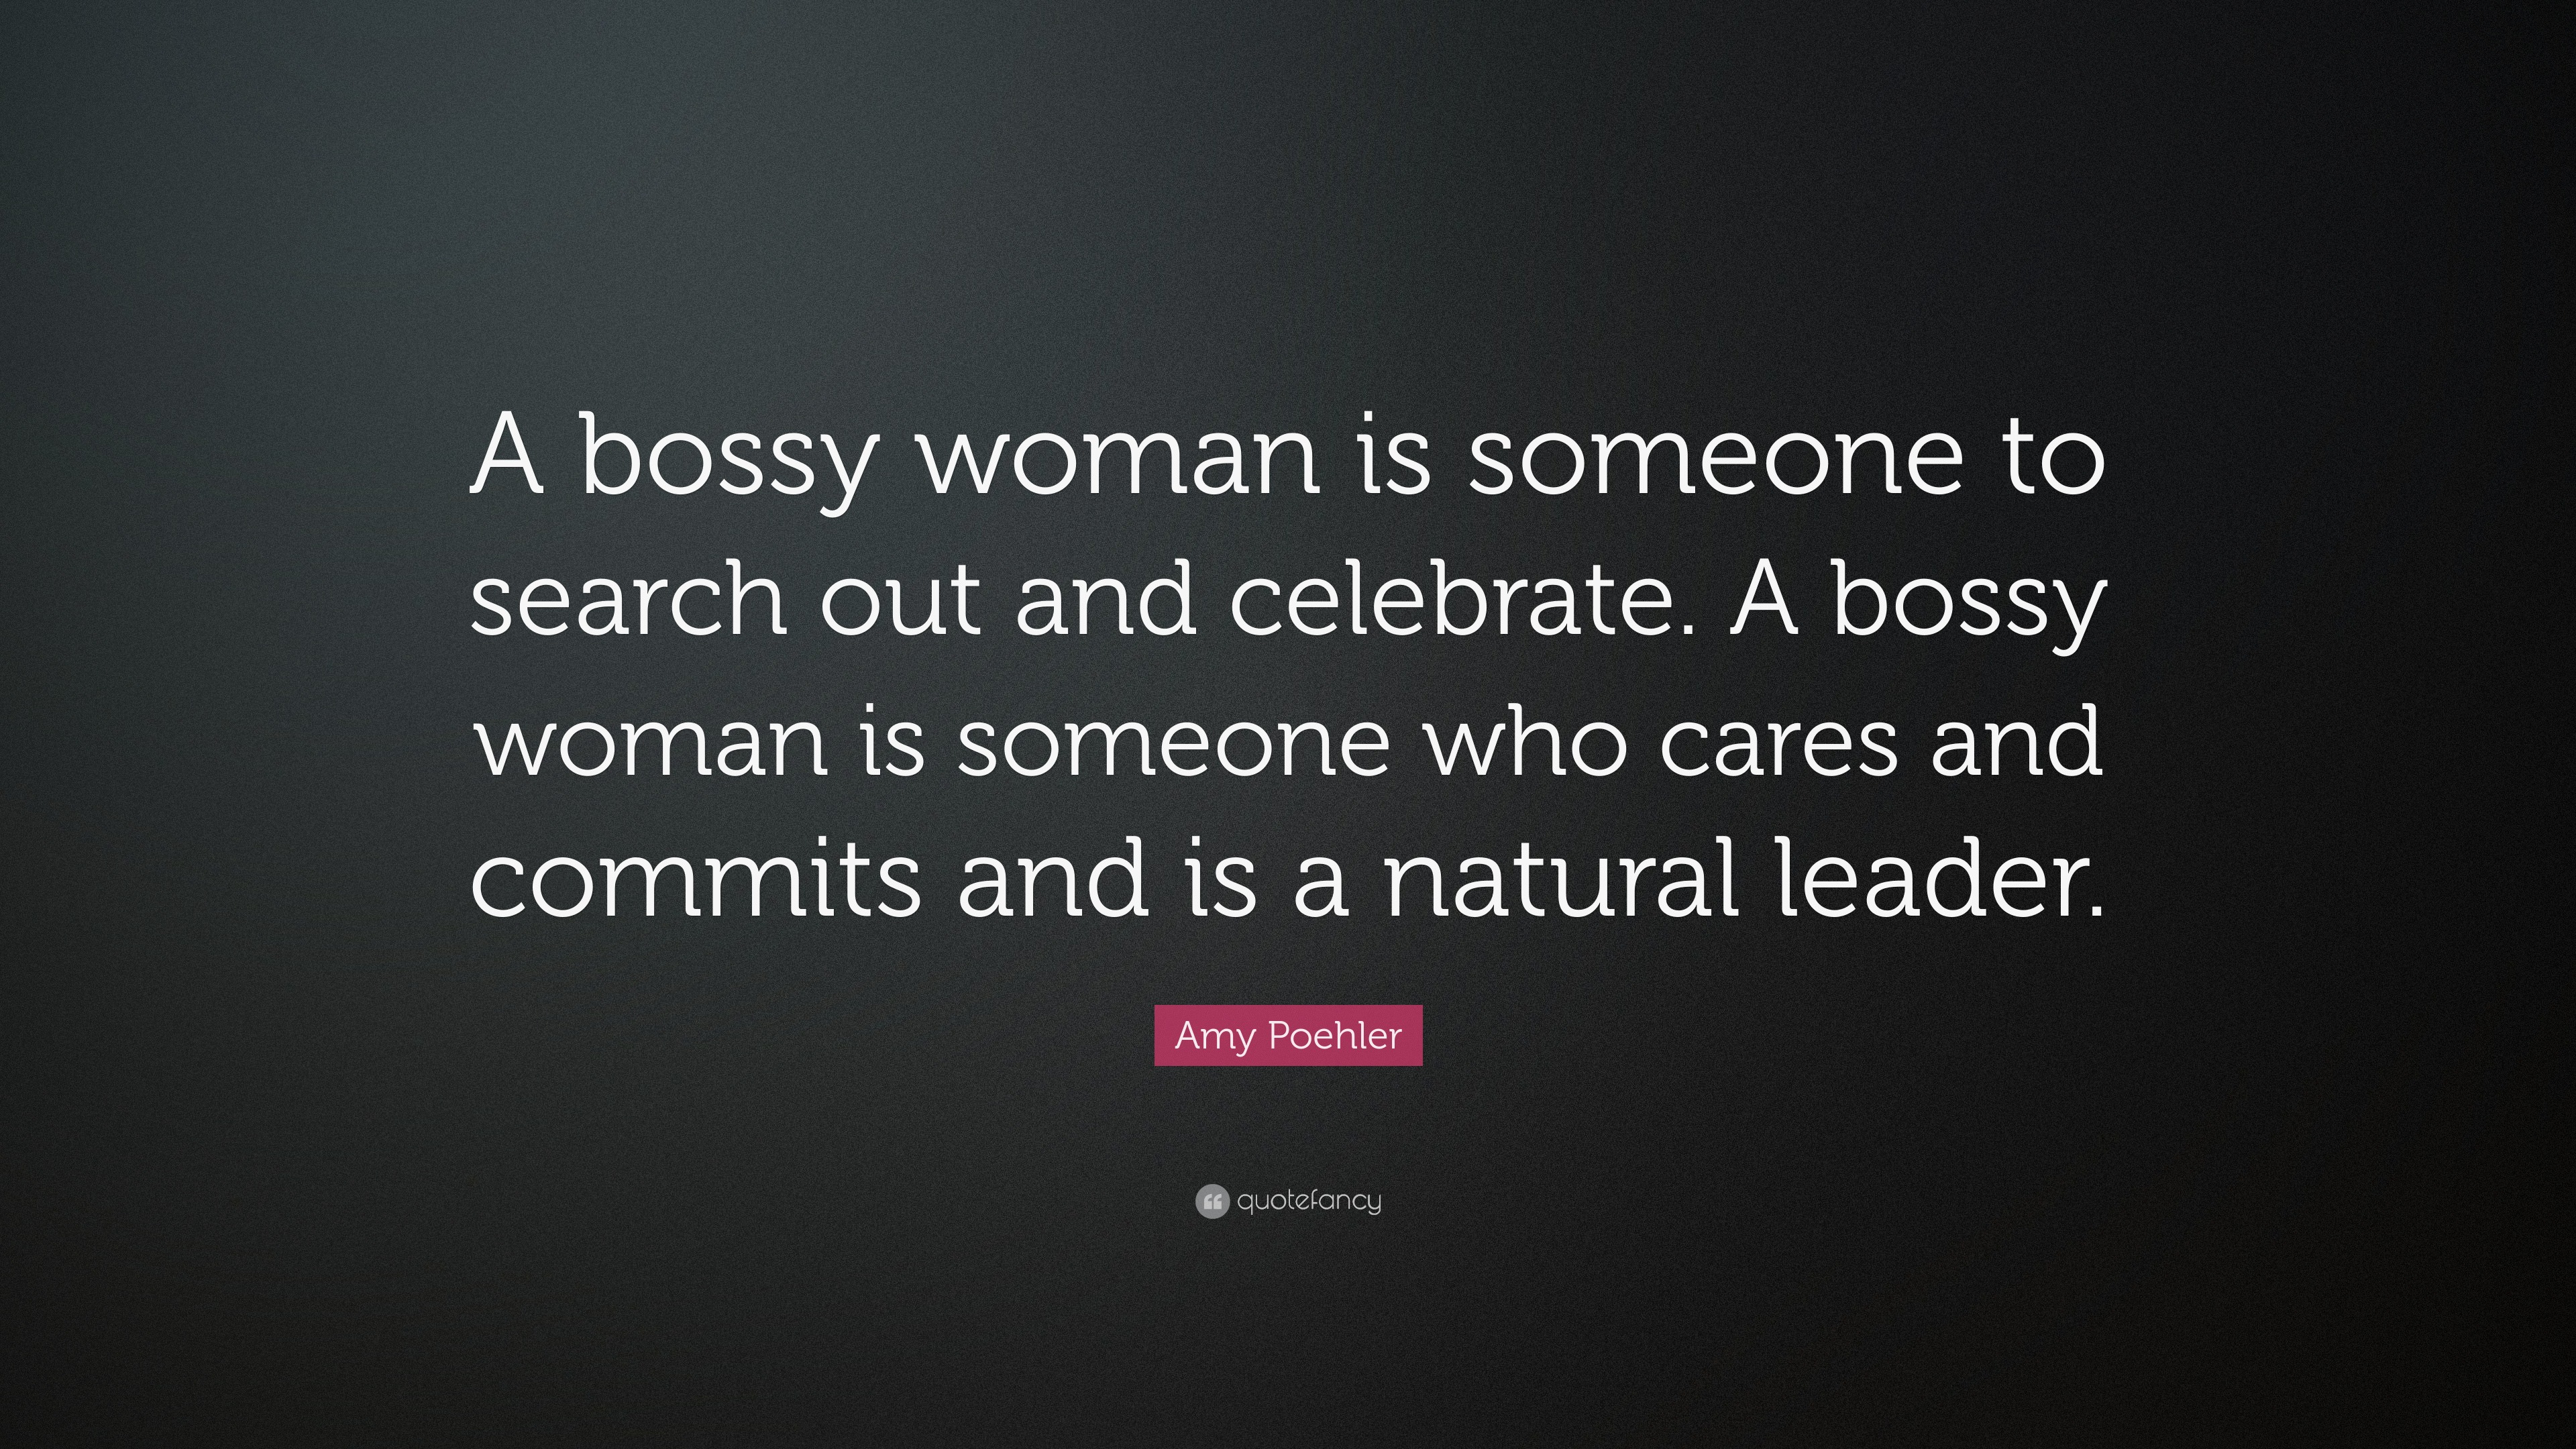 Amy Poehler Quote “a Bossy Woman Is Someone To Search Out And Celebrate A Bossy Woman Is